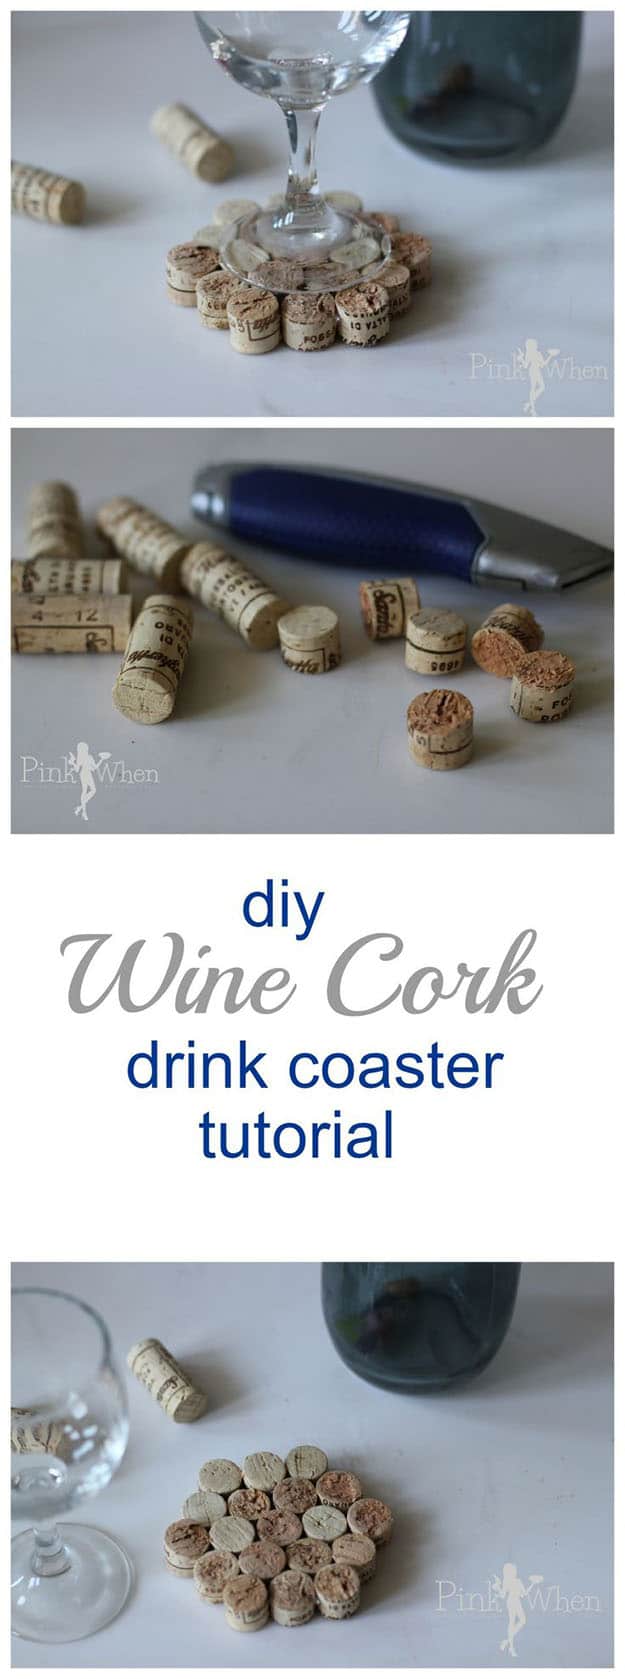 Easy Wine Cork Crafts & Small Projects for the Kitchen - Wine Cork DIY Coasters - DIY Projects & Crafts by DIY JOY #crafts